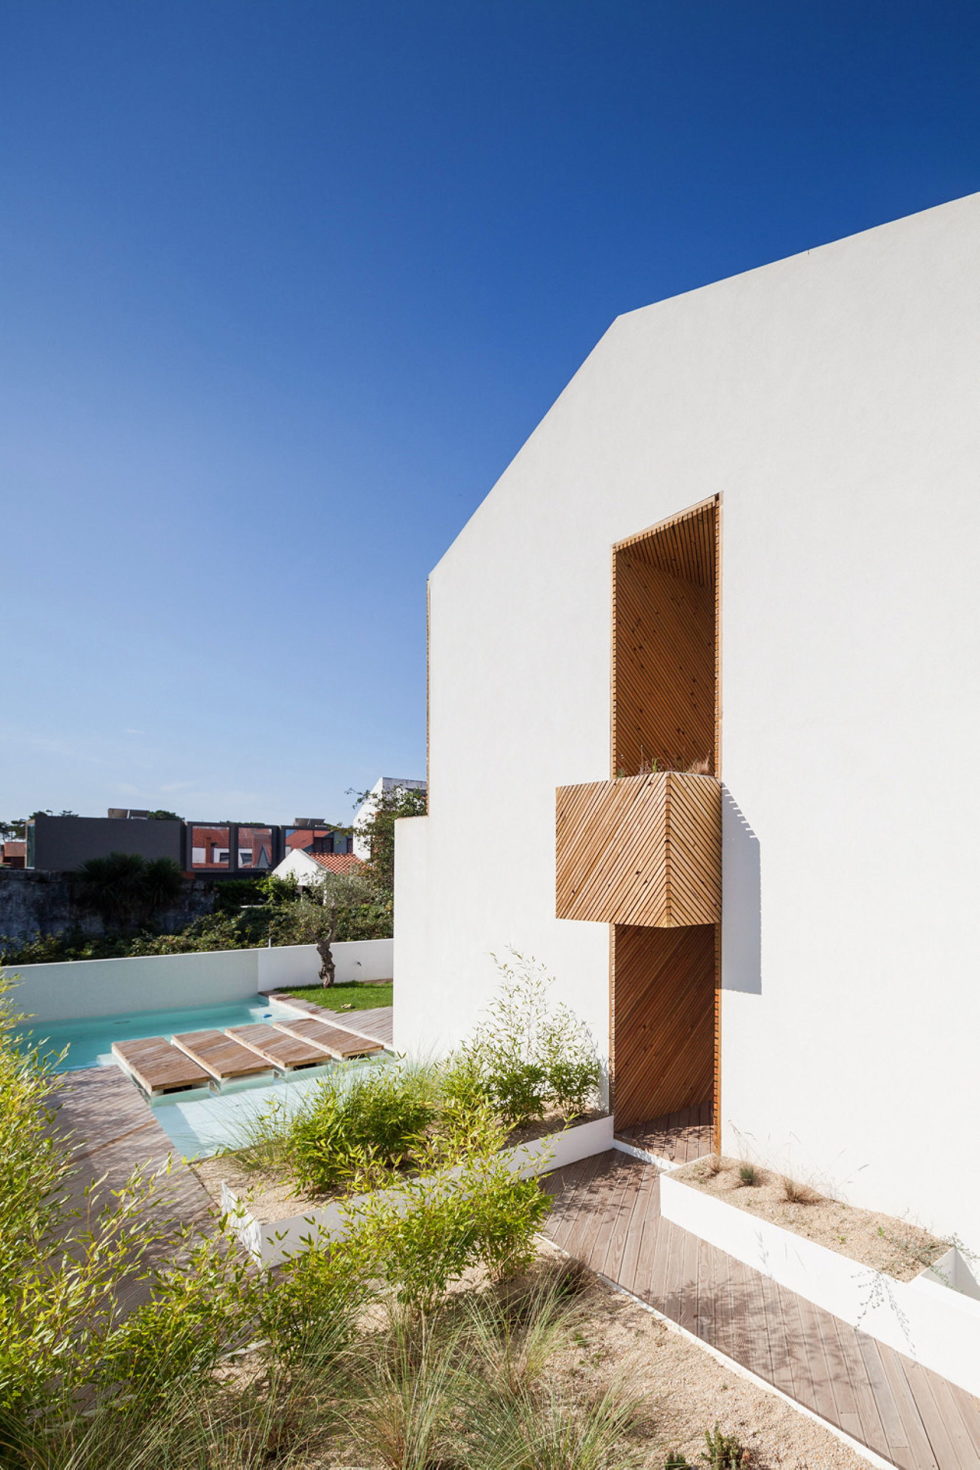 SilverWoodHouse Project In Portugal From 3r Ernesto Pereira Studio 15